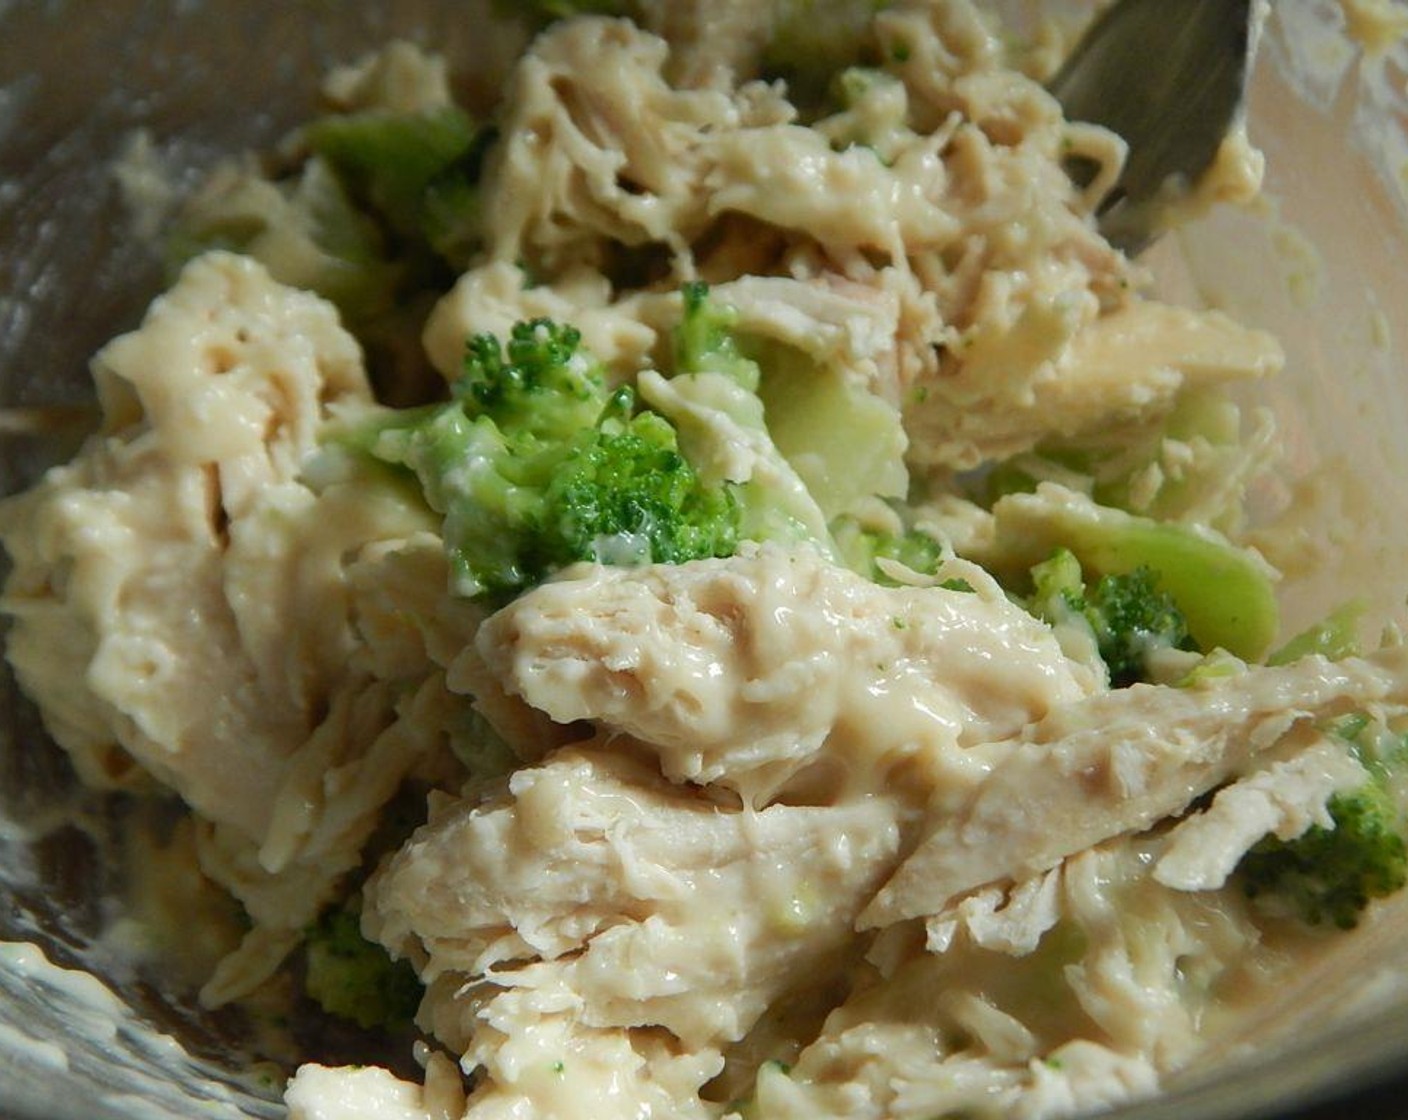 step 5 Cut up your thawed broccoli pieces. In a bowl mix your broccoli pieces, Chicken Breasts (2 cups) and Condensed Cream of Chicken Soup (1/2 cup).